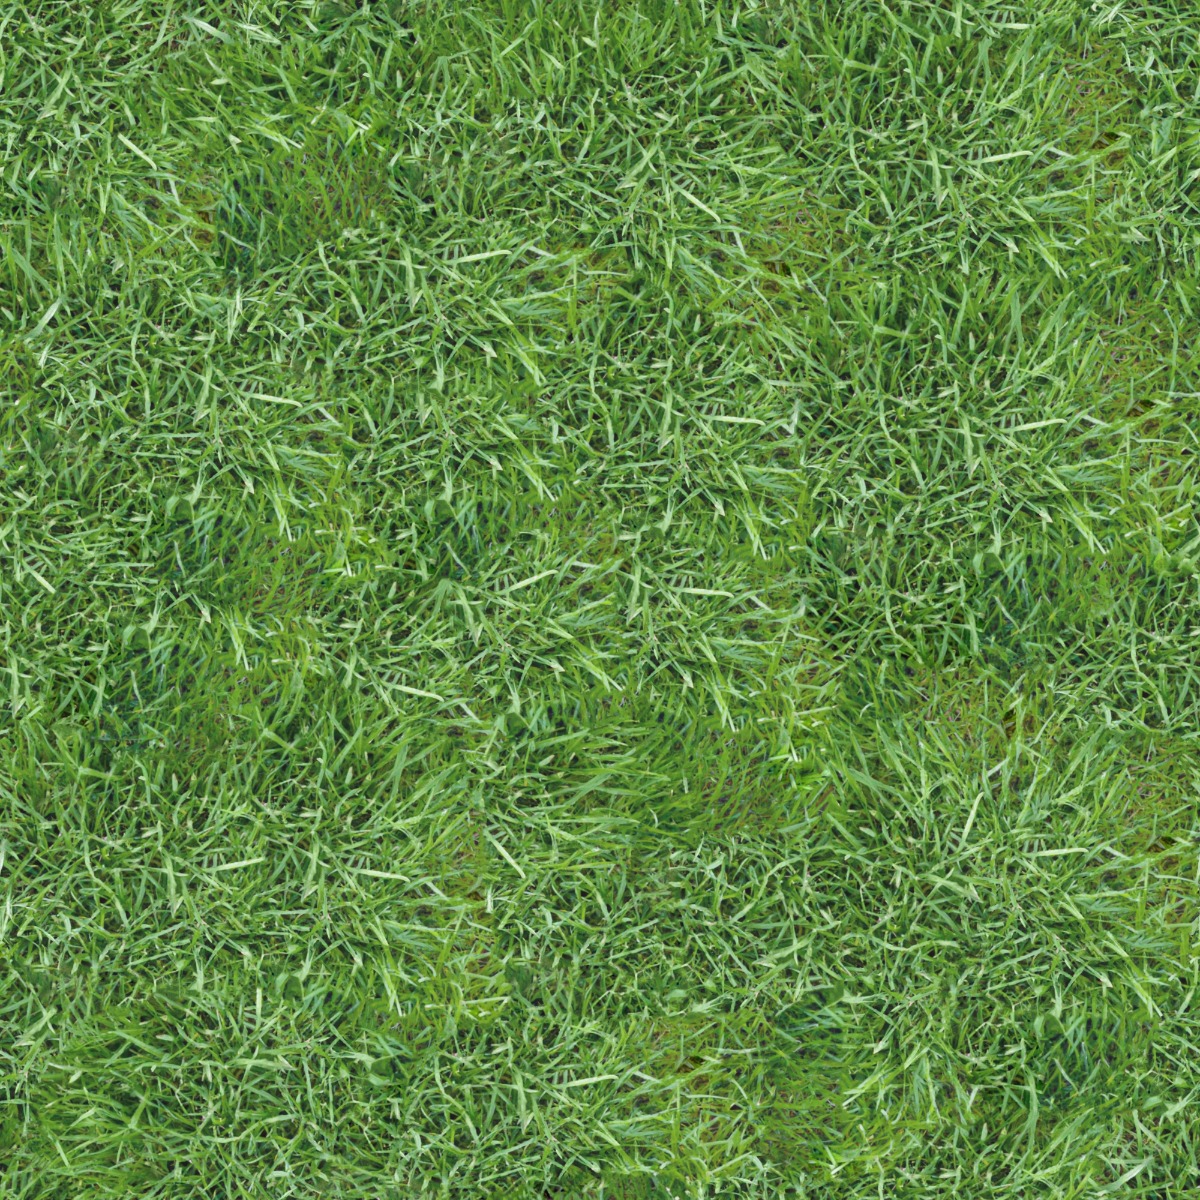 A seamless organic texture with perennial ryegrass units arranged in a None pattern